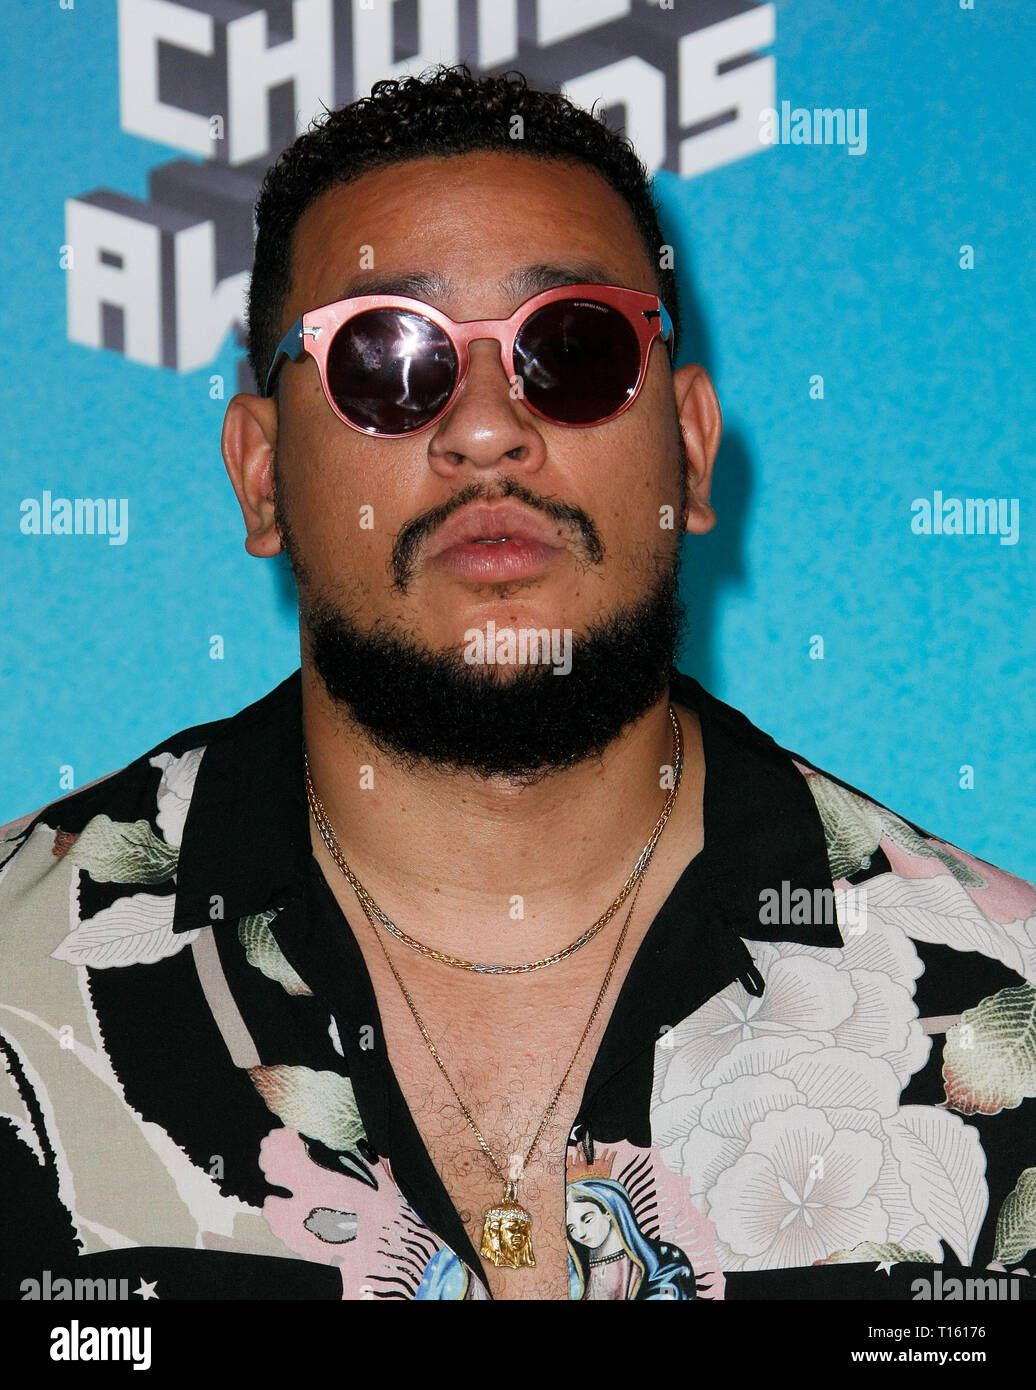 Los Angeles, USA. 23rd Mar, 2019. AKA attends Nickelodeon's 2019 Kids' Choice Awards at Galen Center on March 23, 2019 in Los Angeles, California. Photo: CraSH for imageSPACE/MediaPunch Credit: MediaPunch Inc/Alamy Live News Stock Photo